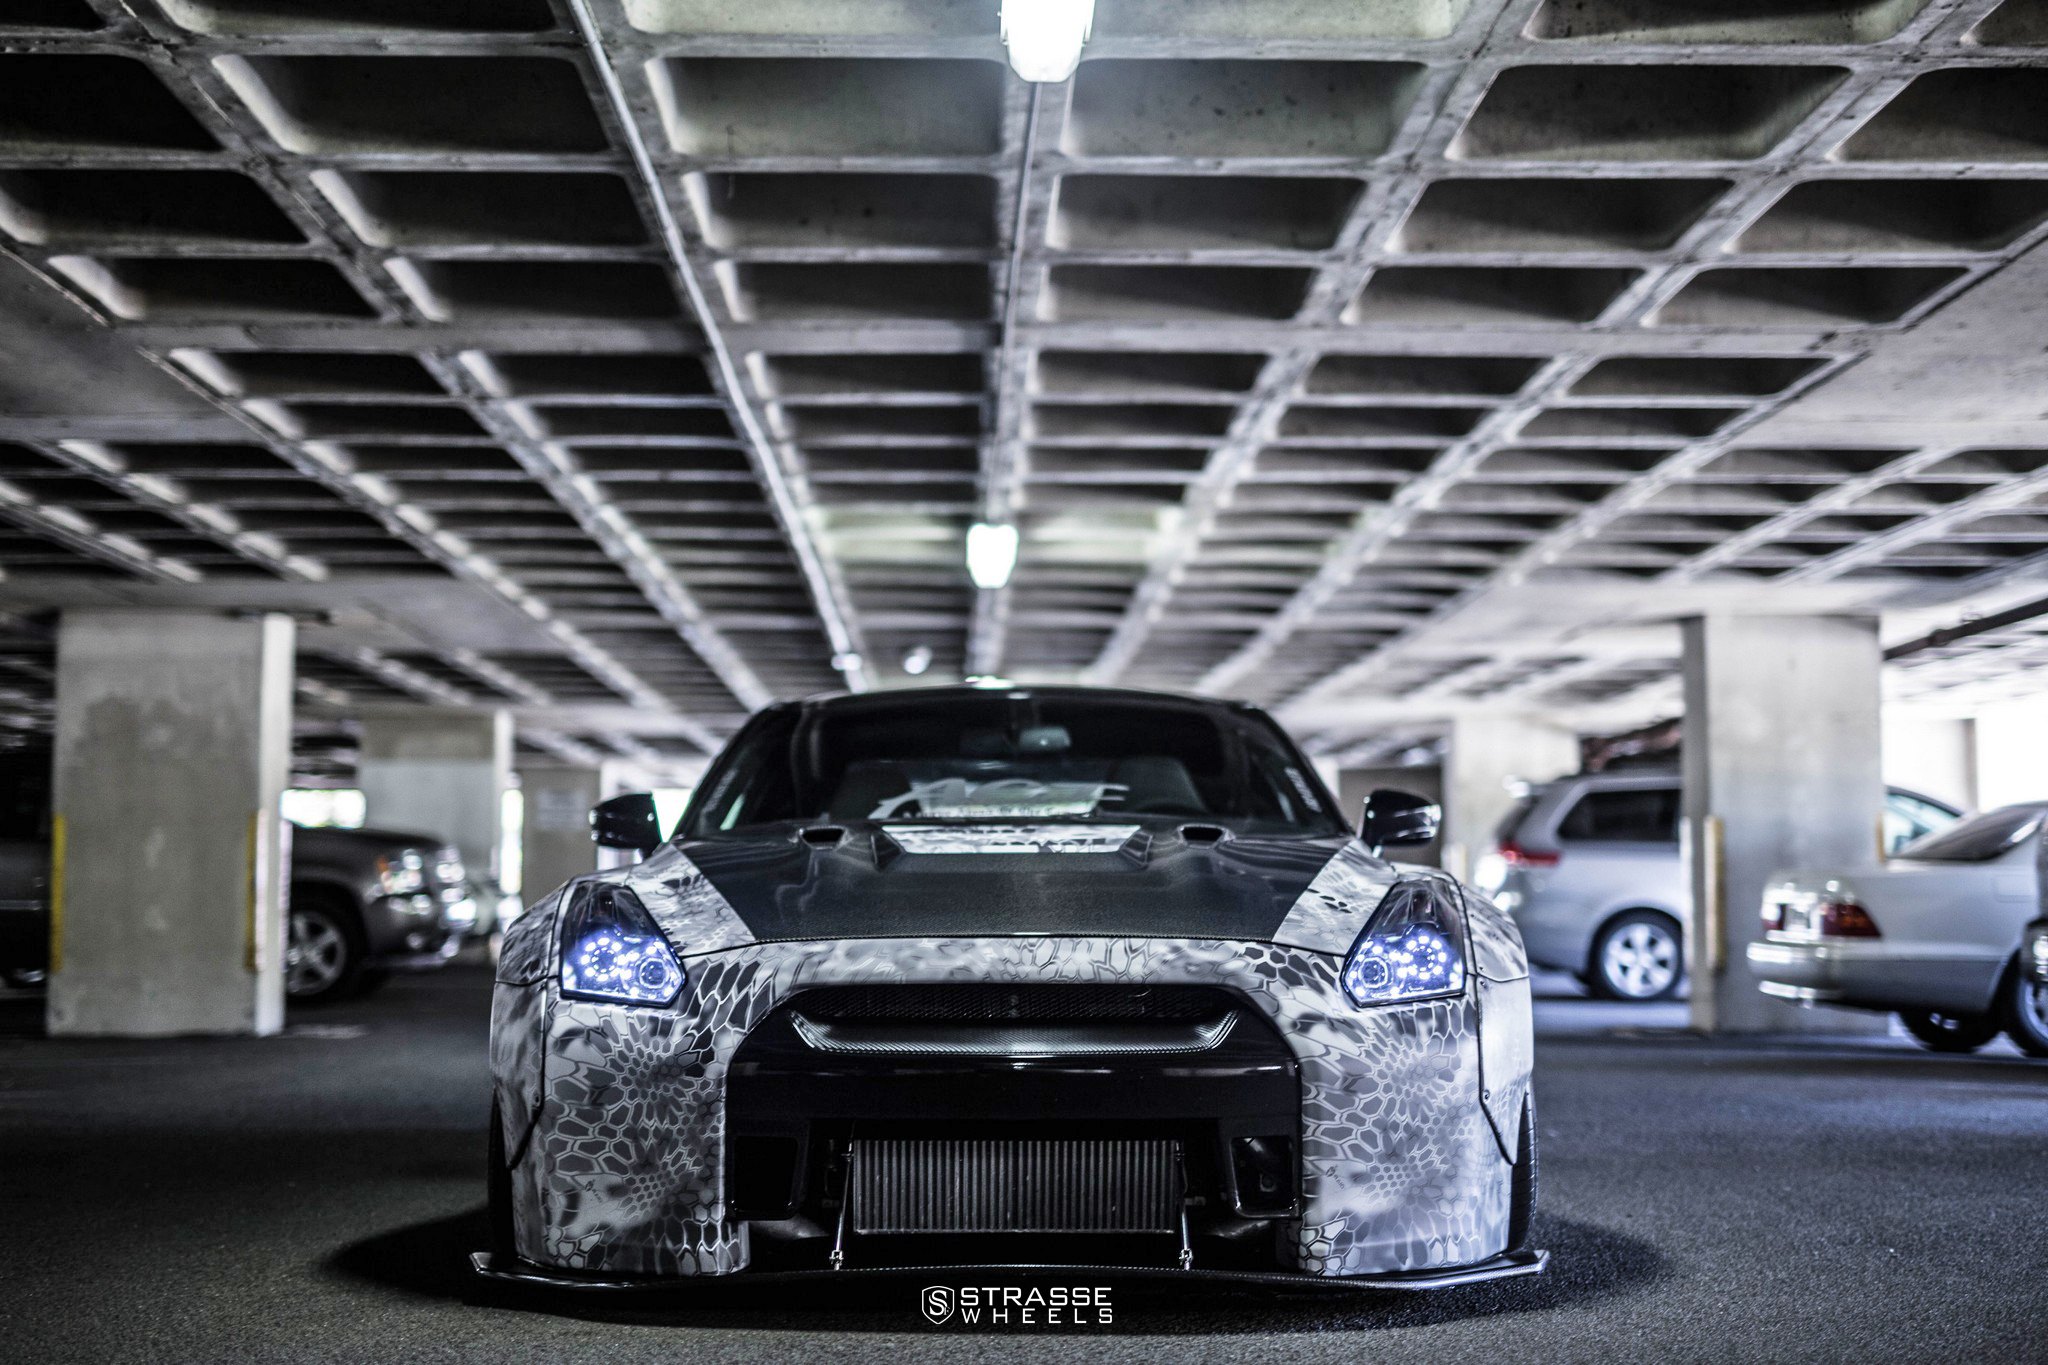 Aftermarket LED Headlights on Nissan GT-R - Photo by Strasse Forged